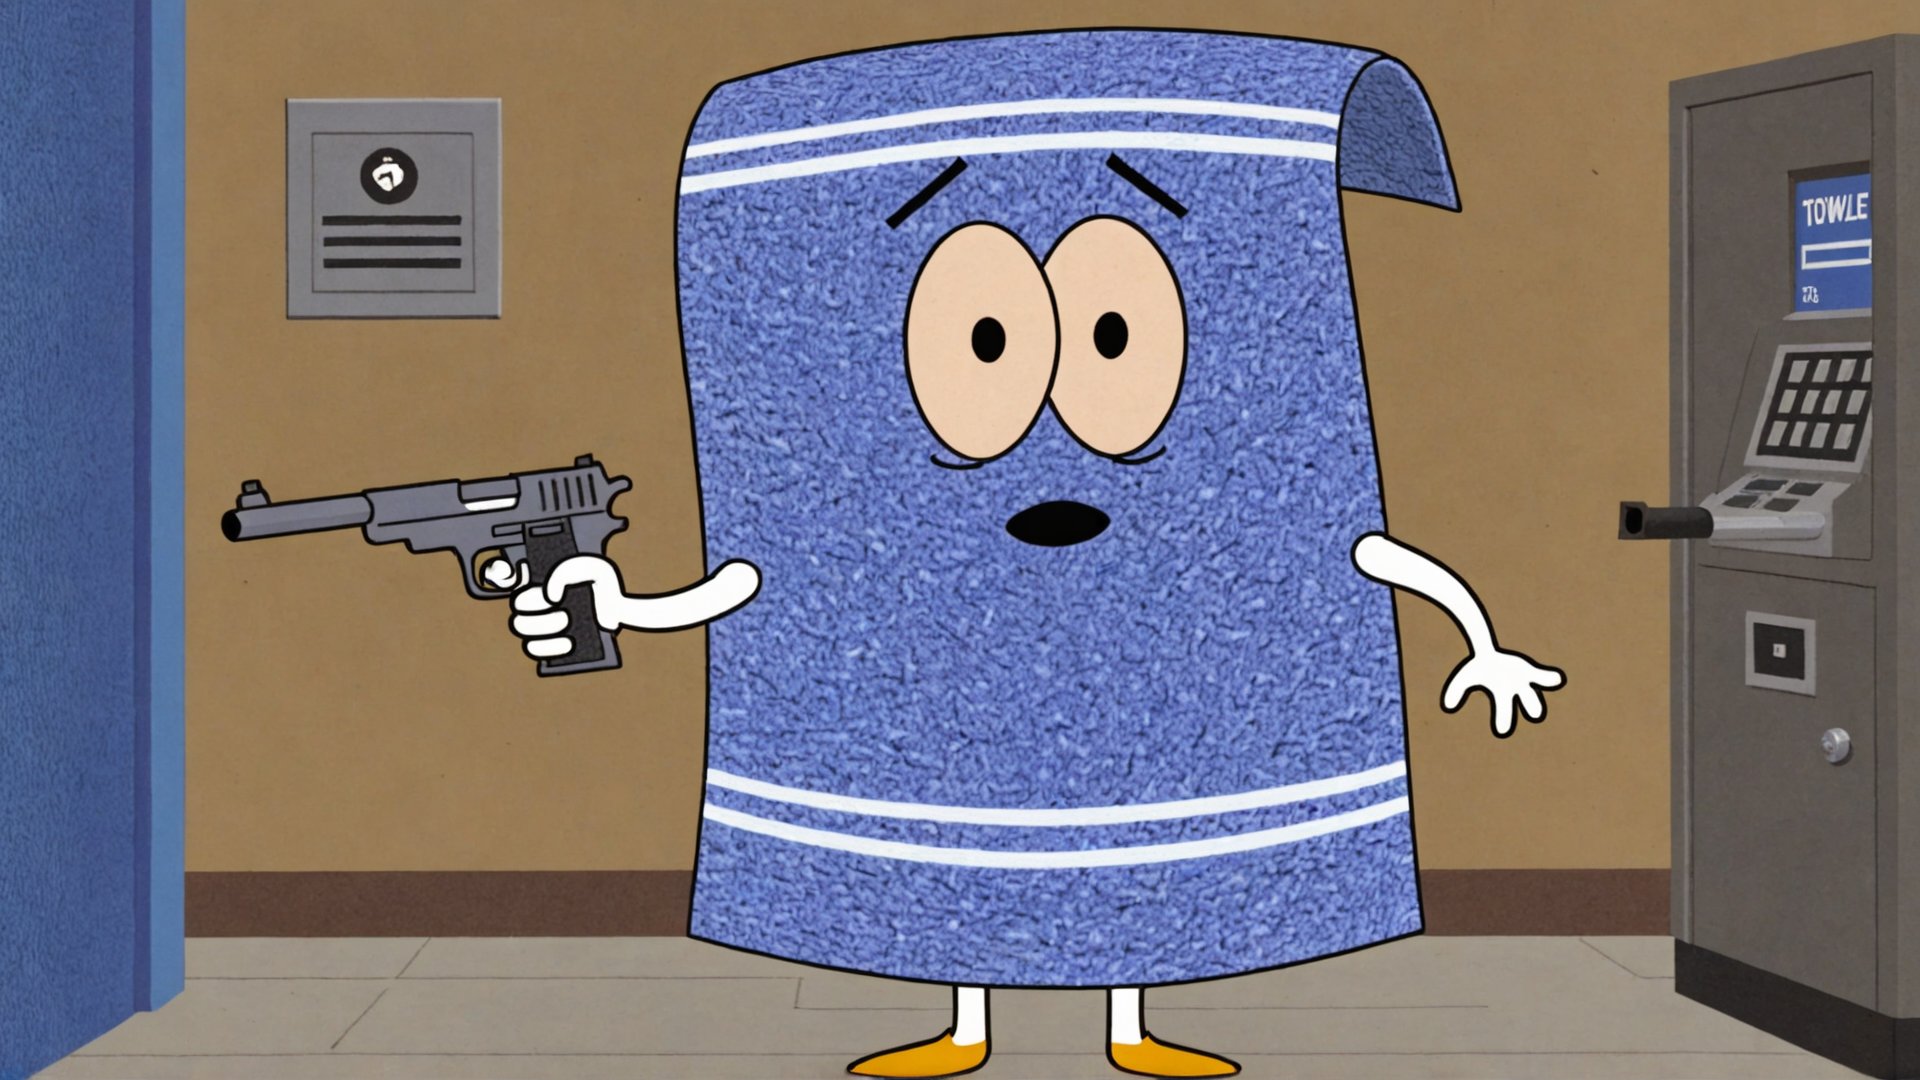 Photo of Towelie with a gun robbing a bank <lora:Towelie_v420:0.8>